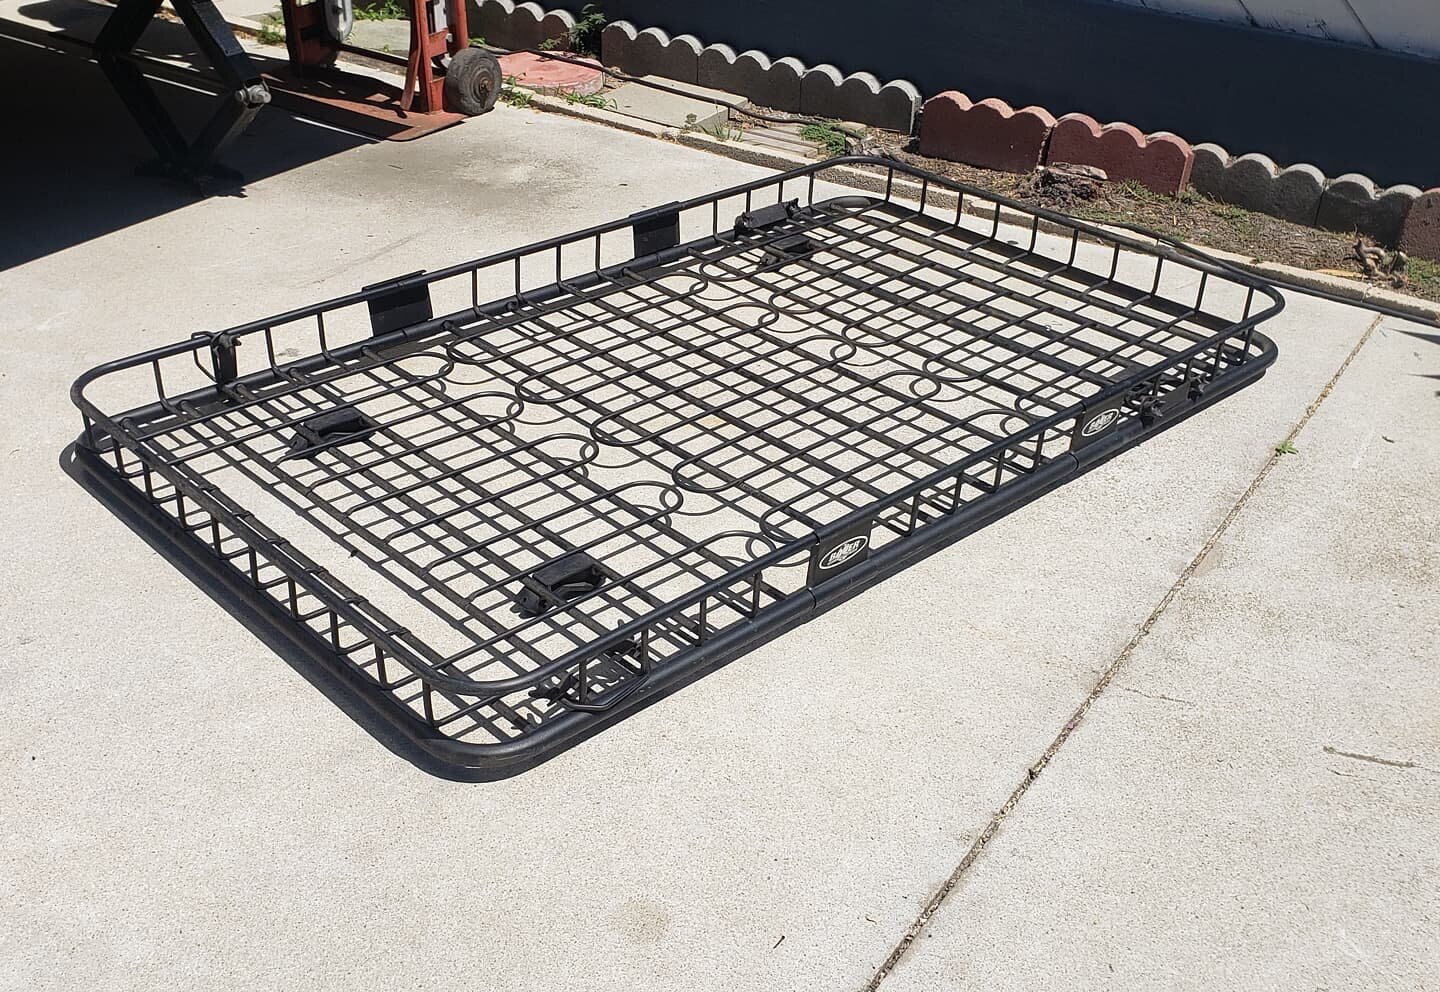 $125. Bauer Roof basket rack cargo carrier with all hardware to install on crossbars. 66&quot; &times; 39&quot;. Nice used condition, no rust
Plus tax.
This item is located in my Antique Mall booth in the city or Orange. Text Message (don't call) for